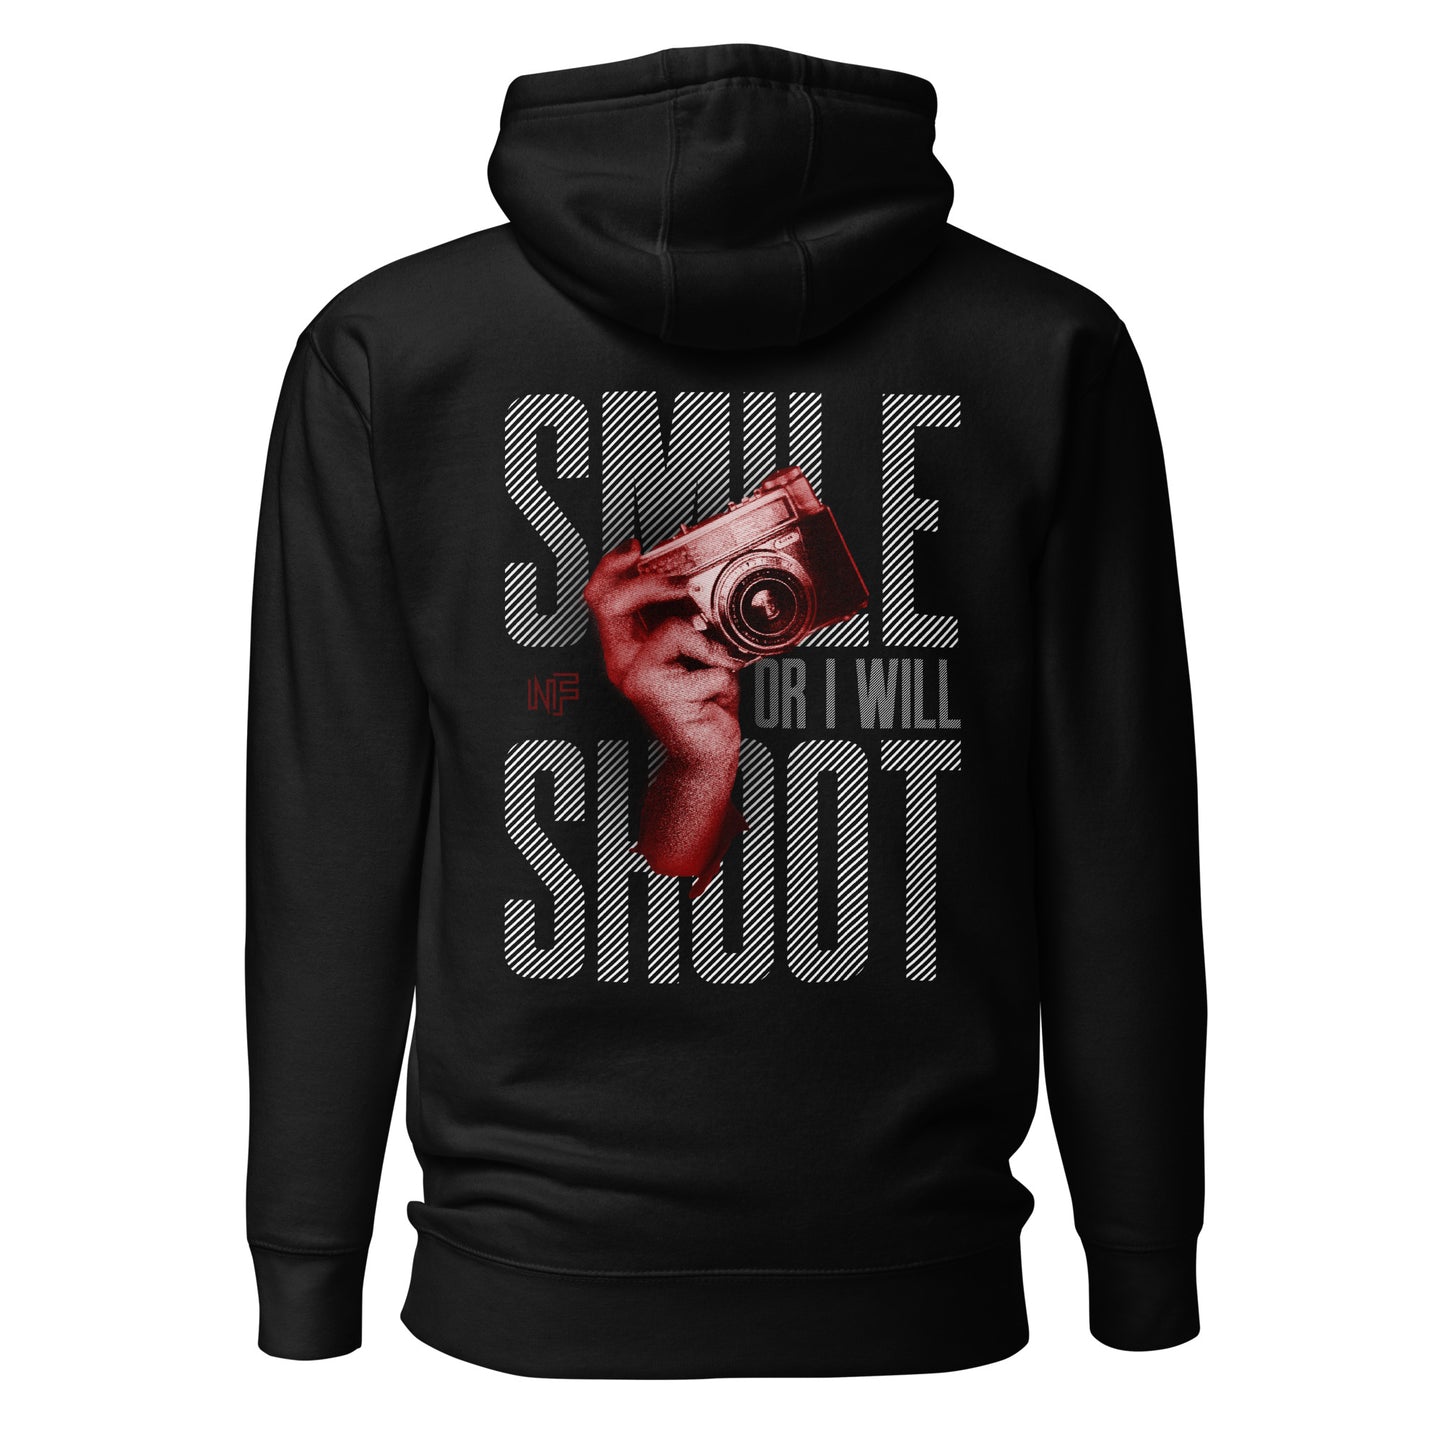 No Fame - Smile or I Will Shoot Hoodie